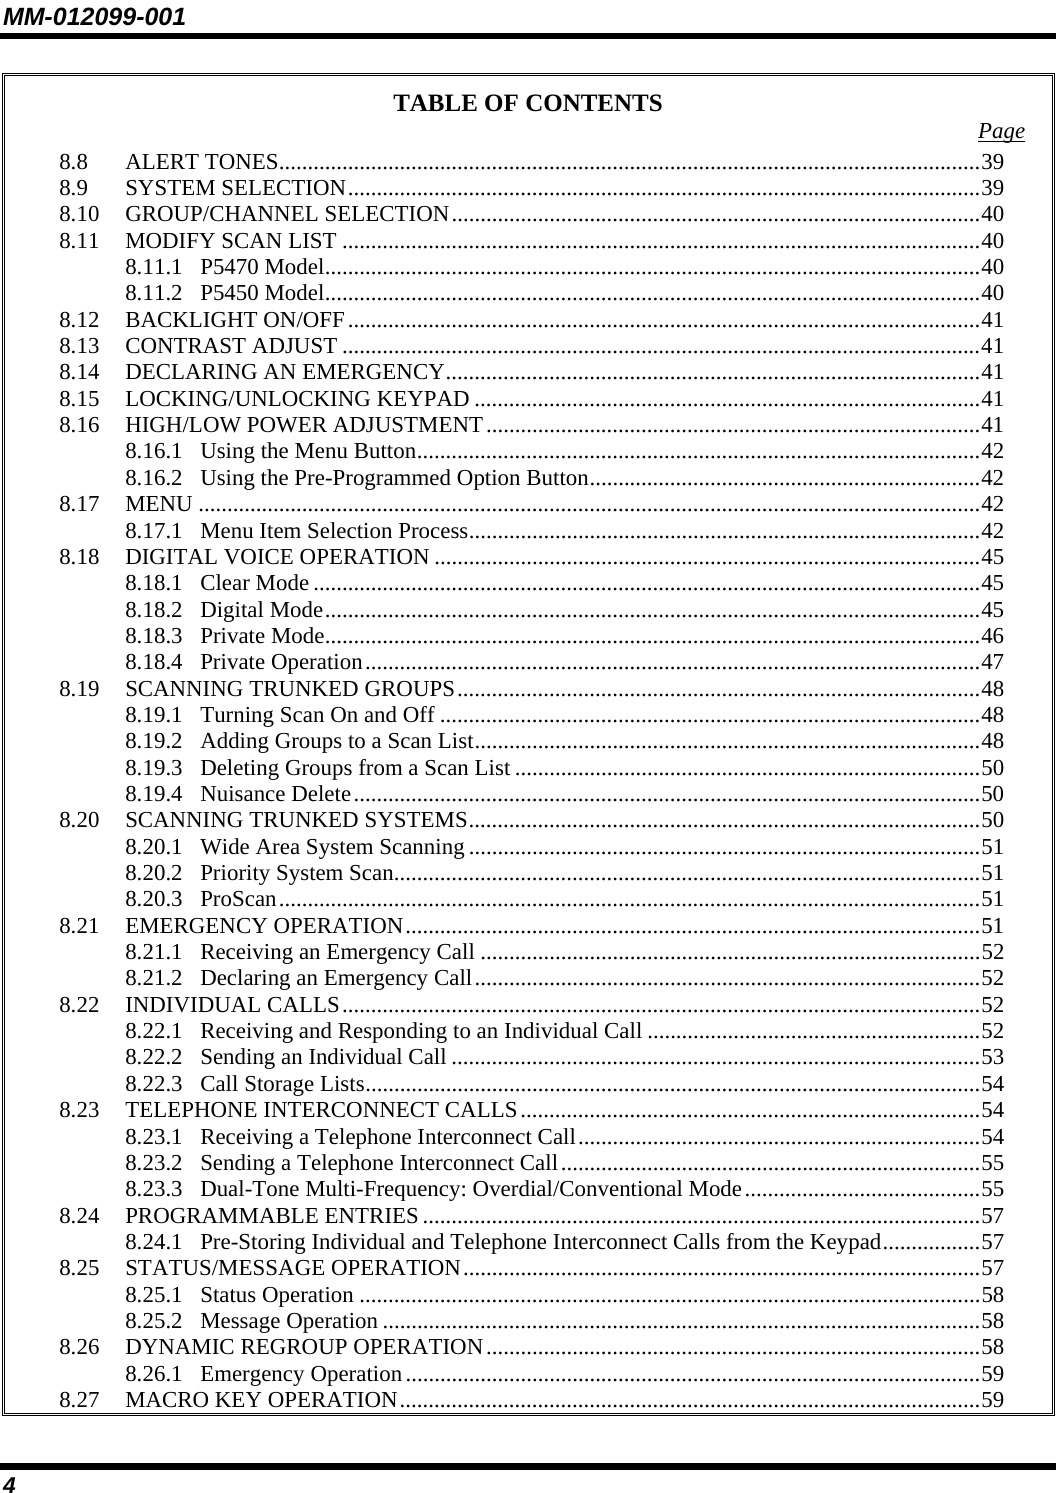 MM-012099-001 4 TABLE OF CONTENTS  Page 8.8 ALERT TONES..........................................................................................................................39 8.9 SYSTEM SELECTION..............................................................................................................39 8.10 GROUP/CHANNEL SELECTION............................................................................................40 8.11 MODIFY SCAN LIST ...............................................................................................................40 8.11.1 P5470 Model..................................................................................................................40 8.11.2 P5450 Model..................................................................................................................40 8.12 BACKLIGHT ON/OFF..............................................................................................................41 8.13 CONTRAST ADJUST ...............................................................................................................41 8.14 DECLARING AN EMERGENCY.............................................................................................41 8.15 LOCKING/UNLOCKING KEYPAD ........................................................................................41 8.16 HIGH/LOW POWER ADJUSTMENT......................................................................................41 8.16.1 Using the Menu Button..................................................................................................42 8.16.2 Using the Pre-Programmed Option Button....................................................................42 8.17 MENU ........................................................................................................................................42 8.17.1 Menu Item Selection Process.........................................................................................42 8.18 DIGITAL VOICE OPERATION ...............................................................................................45 8.18.1 Clear Mode ....................................................................................................................45 8.18.2 Digital Mode..................................................................................................................45 8.18.3 Private Mode..................................................................................................................46 8.18.4 Private Operation...........................................................................................................47 8.19 SCANNING TRUNKED GROUPS...........................................................................................48 8.19.1 Turning Scan On and Off ..............................................................................................48 8.19.2 Adding Groups to a Scan List........................................................................................48 8.19.3 Deleting Groups from a Scan List .................................................................................50 8.19.4 Nuisance Delete.............................................................................................................50 8.20 SCANNING TRUNKED SYSTEMS.........................................................................................50 8.20.1 Wide Area System Scanning .........................................................................................51 8.20.2 Priority System Scan......................................................................................................51 8.20.3 ProScan..........................................................................................................................51 8.21 EMERGENCY OPERATION....................................................................................................51 8.21.1 Receiving an Emergency Call .......................................................................................52 8.21.2 Declaring an Emergency Call........................................................................................52 8.22 INDIVIDUAL CALLS...............................................................................................................52 8.22.1 Receiving and Responding to an Individual Call ..........................................................52 8.22.2 Sending an Individual Call ............................................................................................53 8.22.3 Call Storage Lists...........................................................................................................54 8.23 TELEPHONE INTERCONNECT CALLS................................................................................54 8.23.1 Receiving a Telephone Interconnect Call......................................................................54 8.23.2 Sending a Telephone Interconnect Call.........................................................................55 8.23.3 Dual-Tone Multi-Frequency: Overdial/Conventional Mode.........................................55 8.24 PROGRAMMABLE ENTRIES .................................................................................................57 8.24.1 Pre-Storing Individual and Telephone Interconnect Calls from the Keypad.................57 8.25 STATUS/MESSAGE OPERATION..........................................................................................57 8.25.1 Status Operation ............................................................................................................58 8.25.2 Message Operation ........................................................................................................58 8.26 DYNAMIC REGROUP OPERATION......................................................................................58 8.26.1 Emergency Operation....................................................................................................59 8.27 MACRO KEY OPERATION.....................................................................................................59 